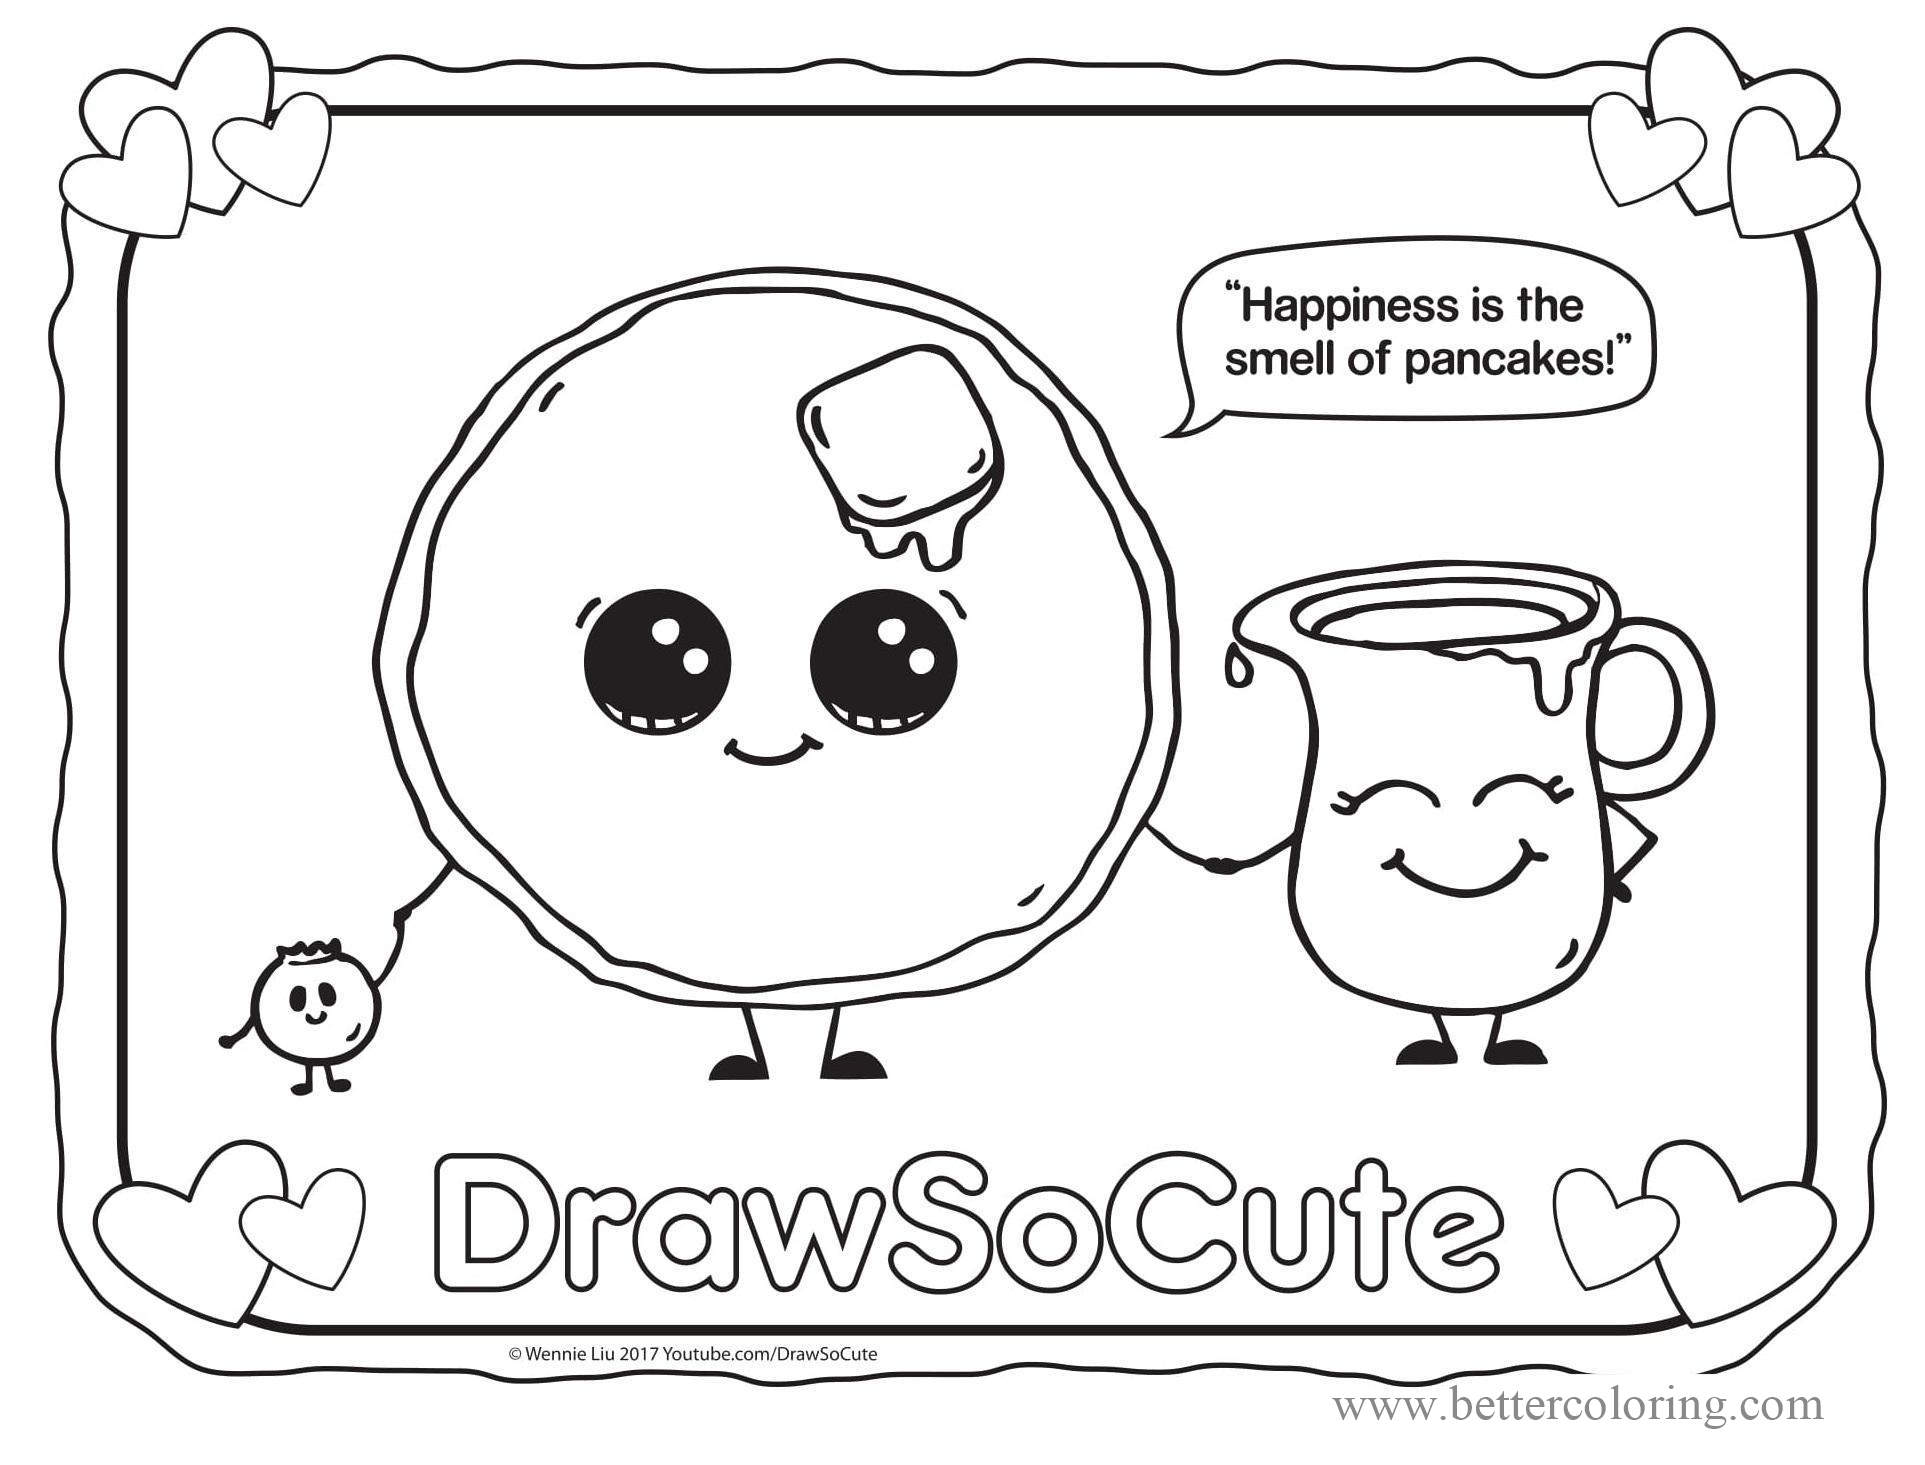 Free Draw So Cute Pancake Coloring Pages printable